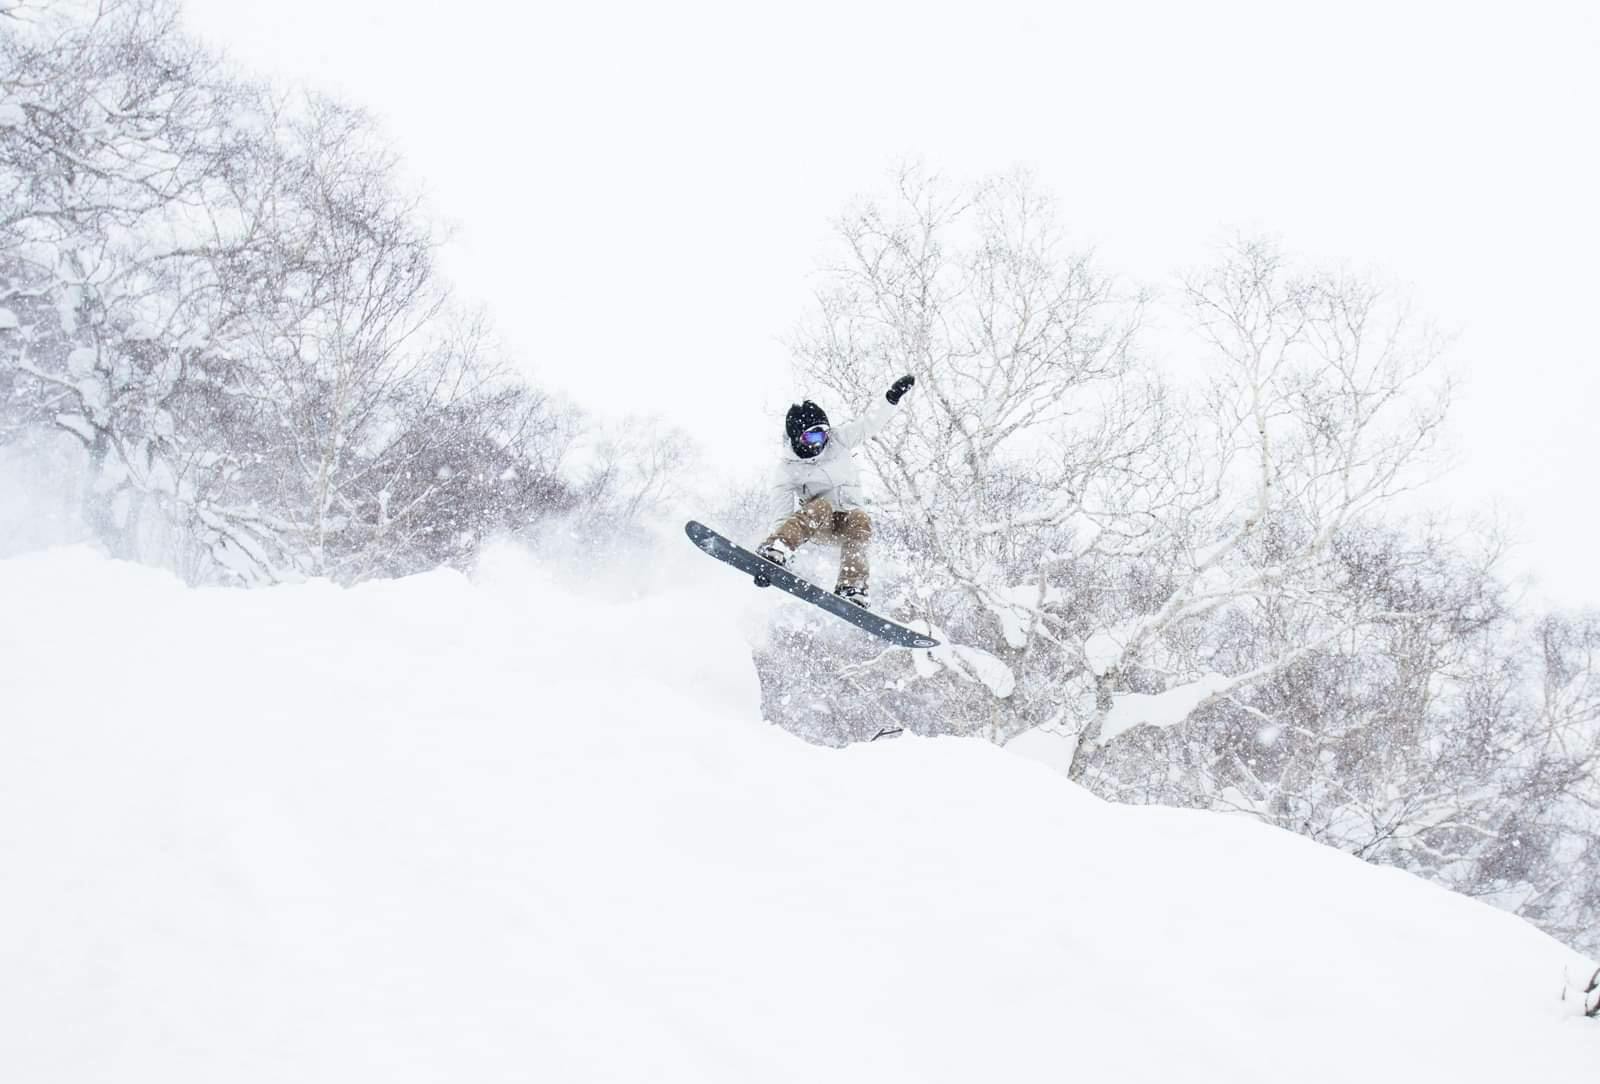 A snowboarder executes a jump on a snowy day